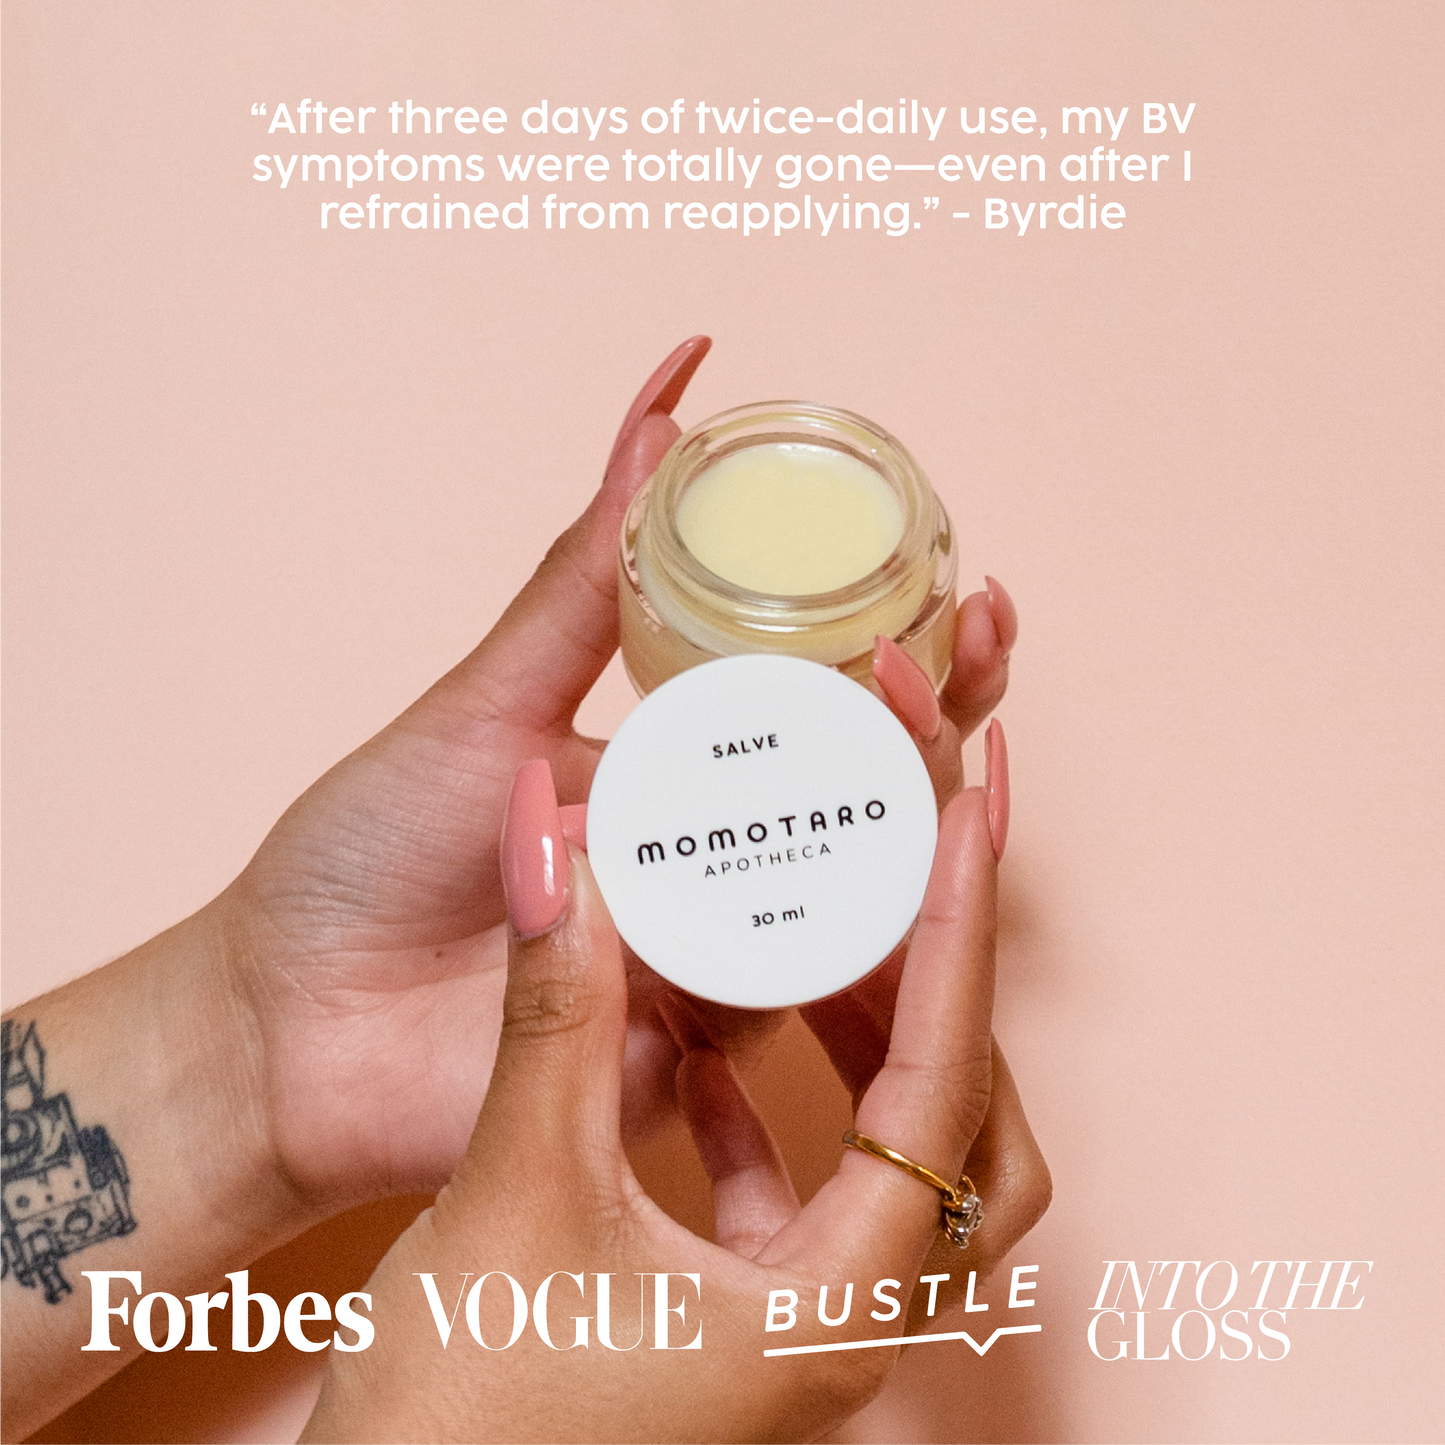 Our Salve is featured by Forbes, Vogue, Bustle, Into the Gloss